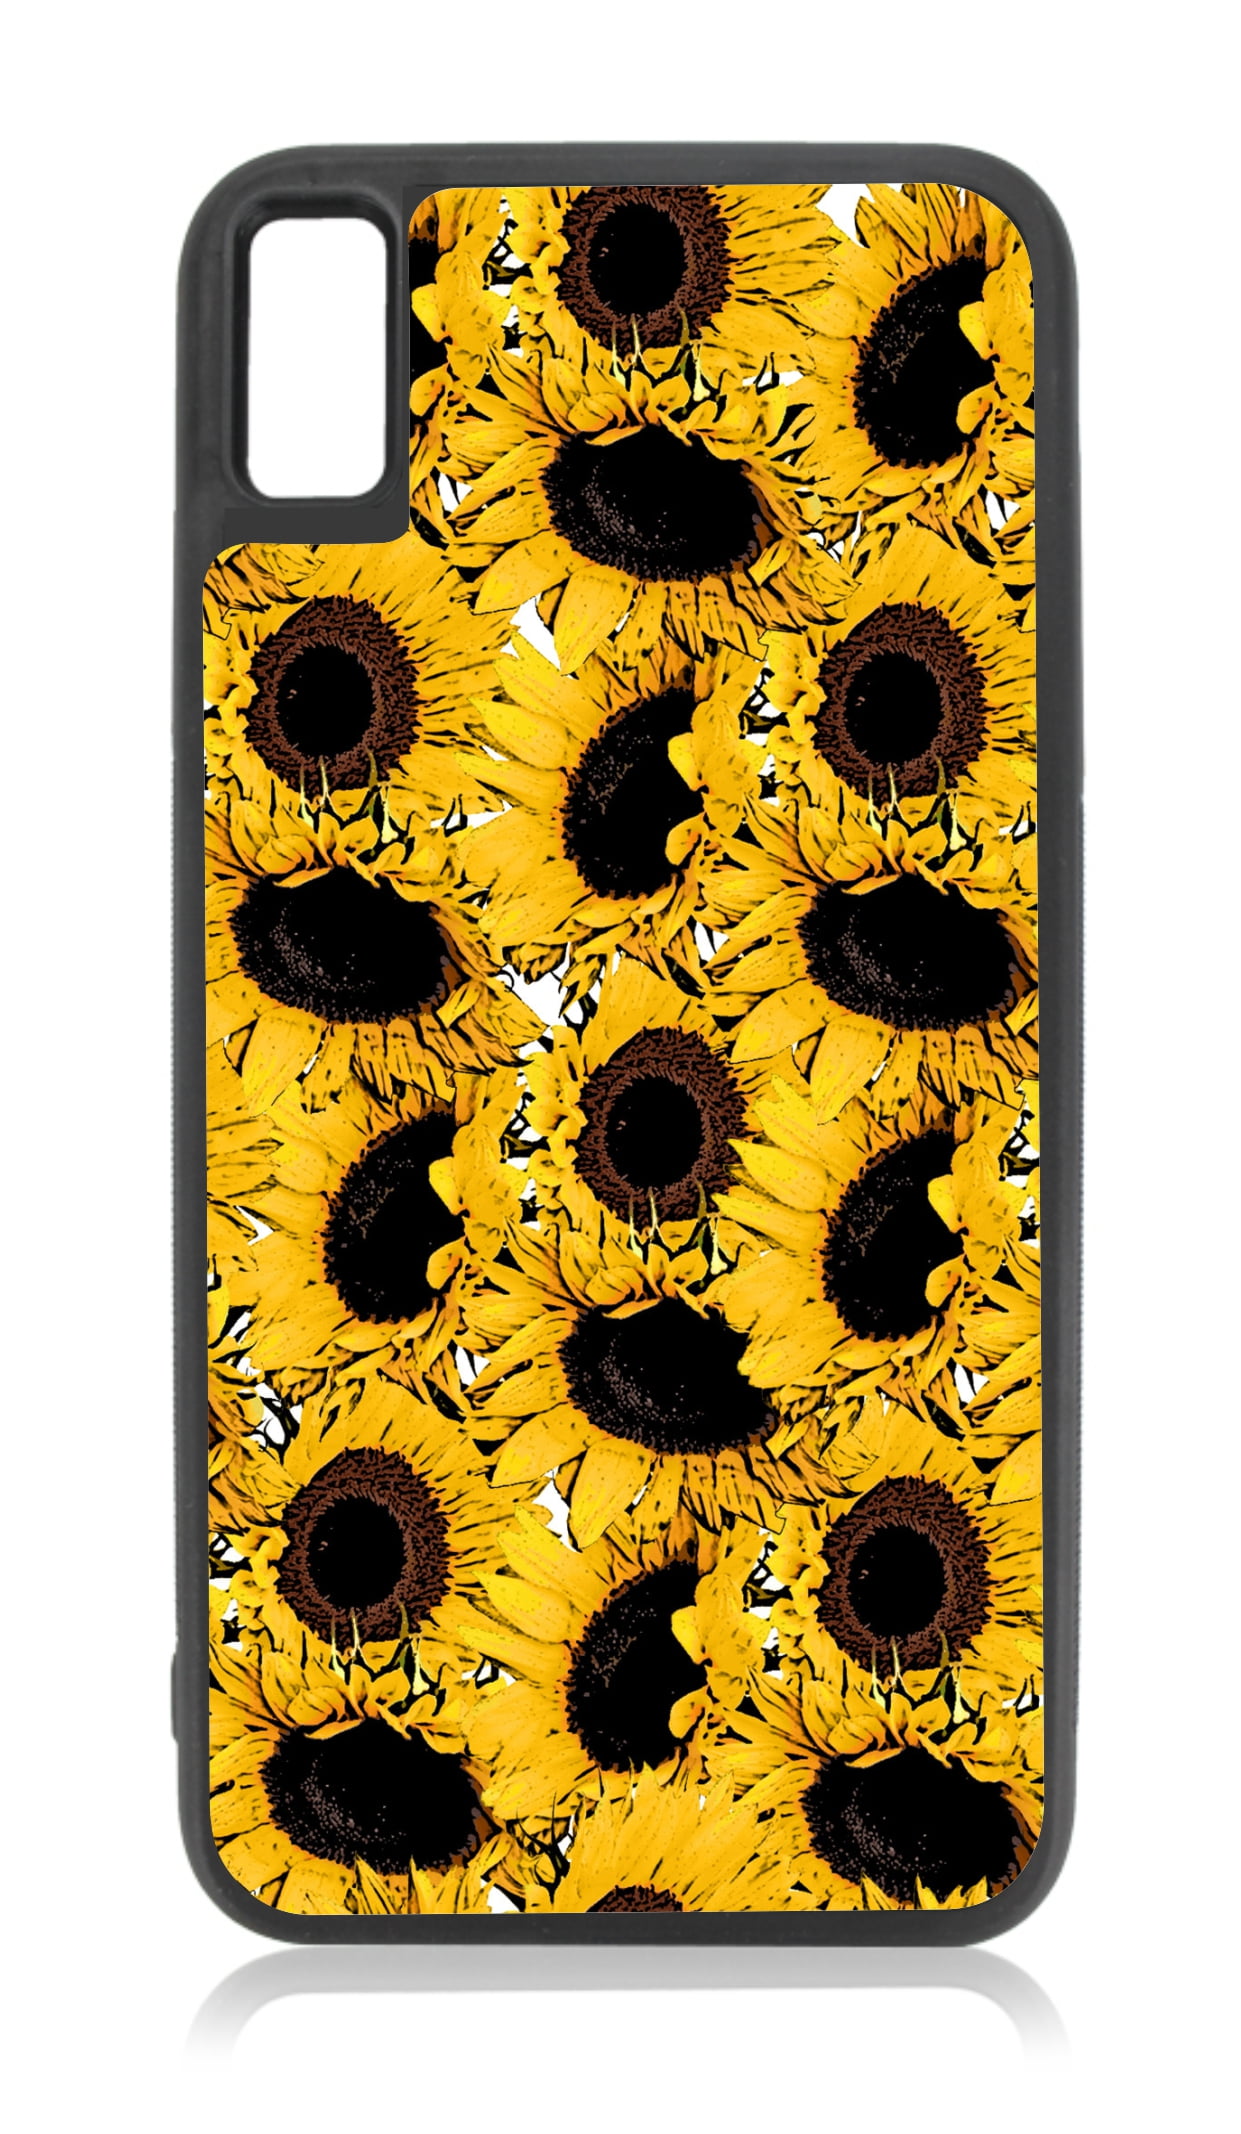 Sunflower Flowers Floral Pattern Print Black Rubber Case For IPhone